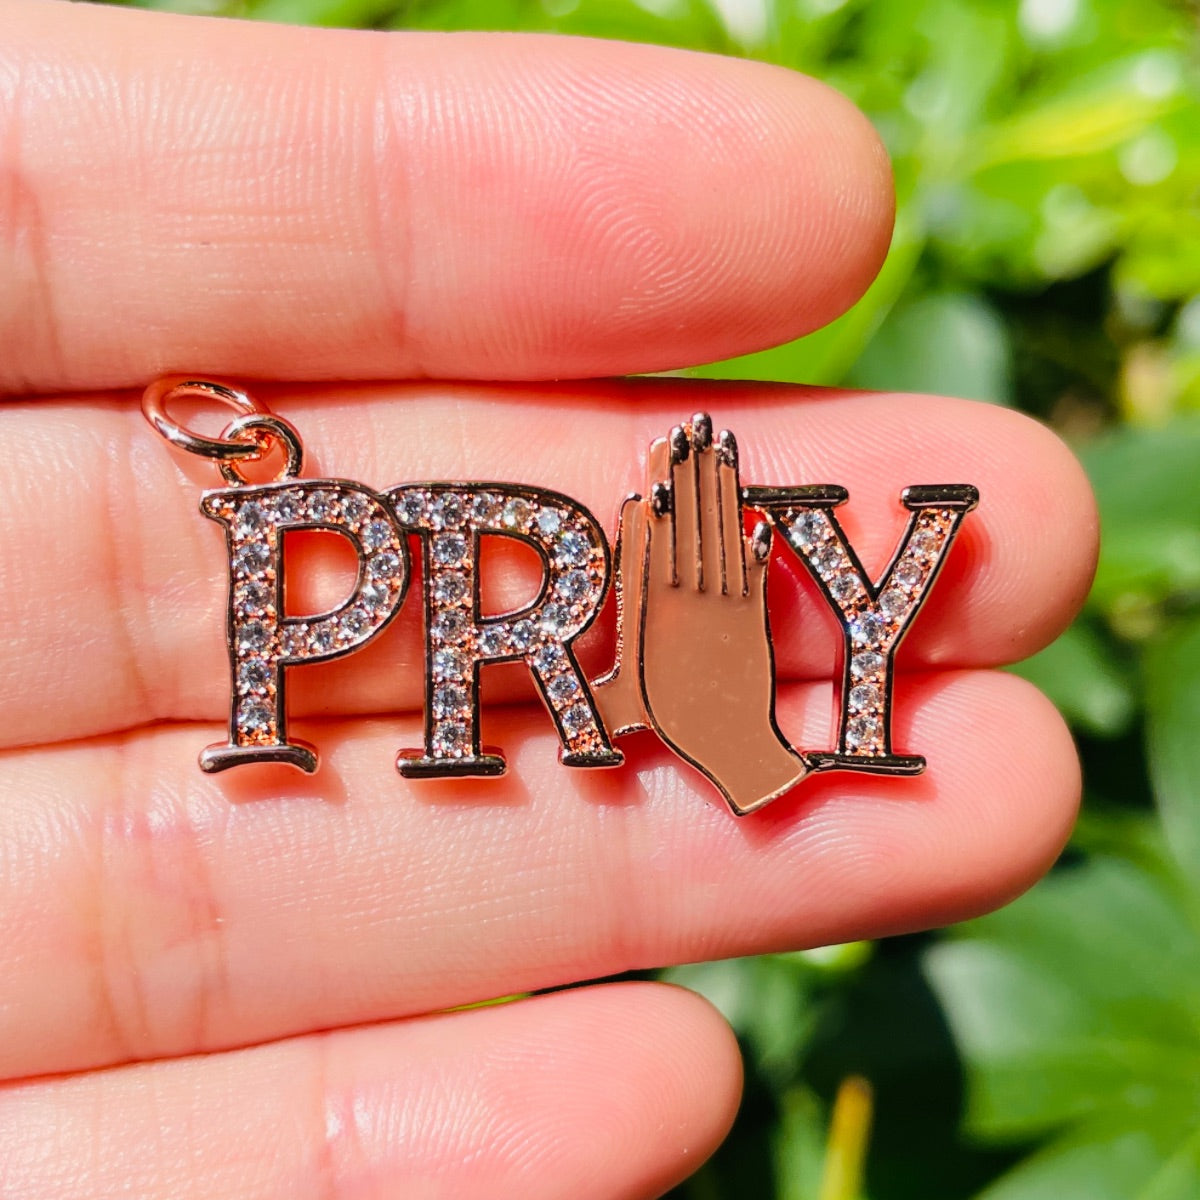 10pcs/lot 35*18mm CZ Pave Praying Hands Pray Word Charms Rose Gold CZ Paved Charms Christian Quotes New Charms Arrivals Words & Quotes Charms Beads Beyond